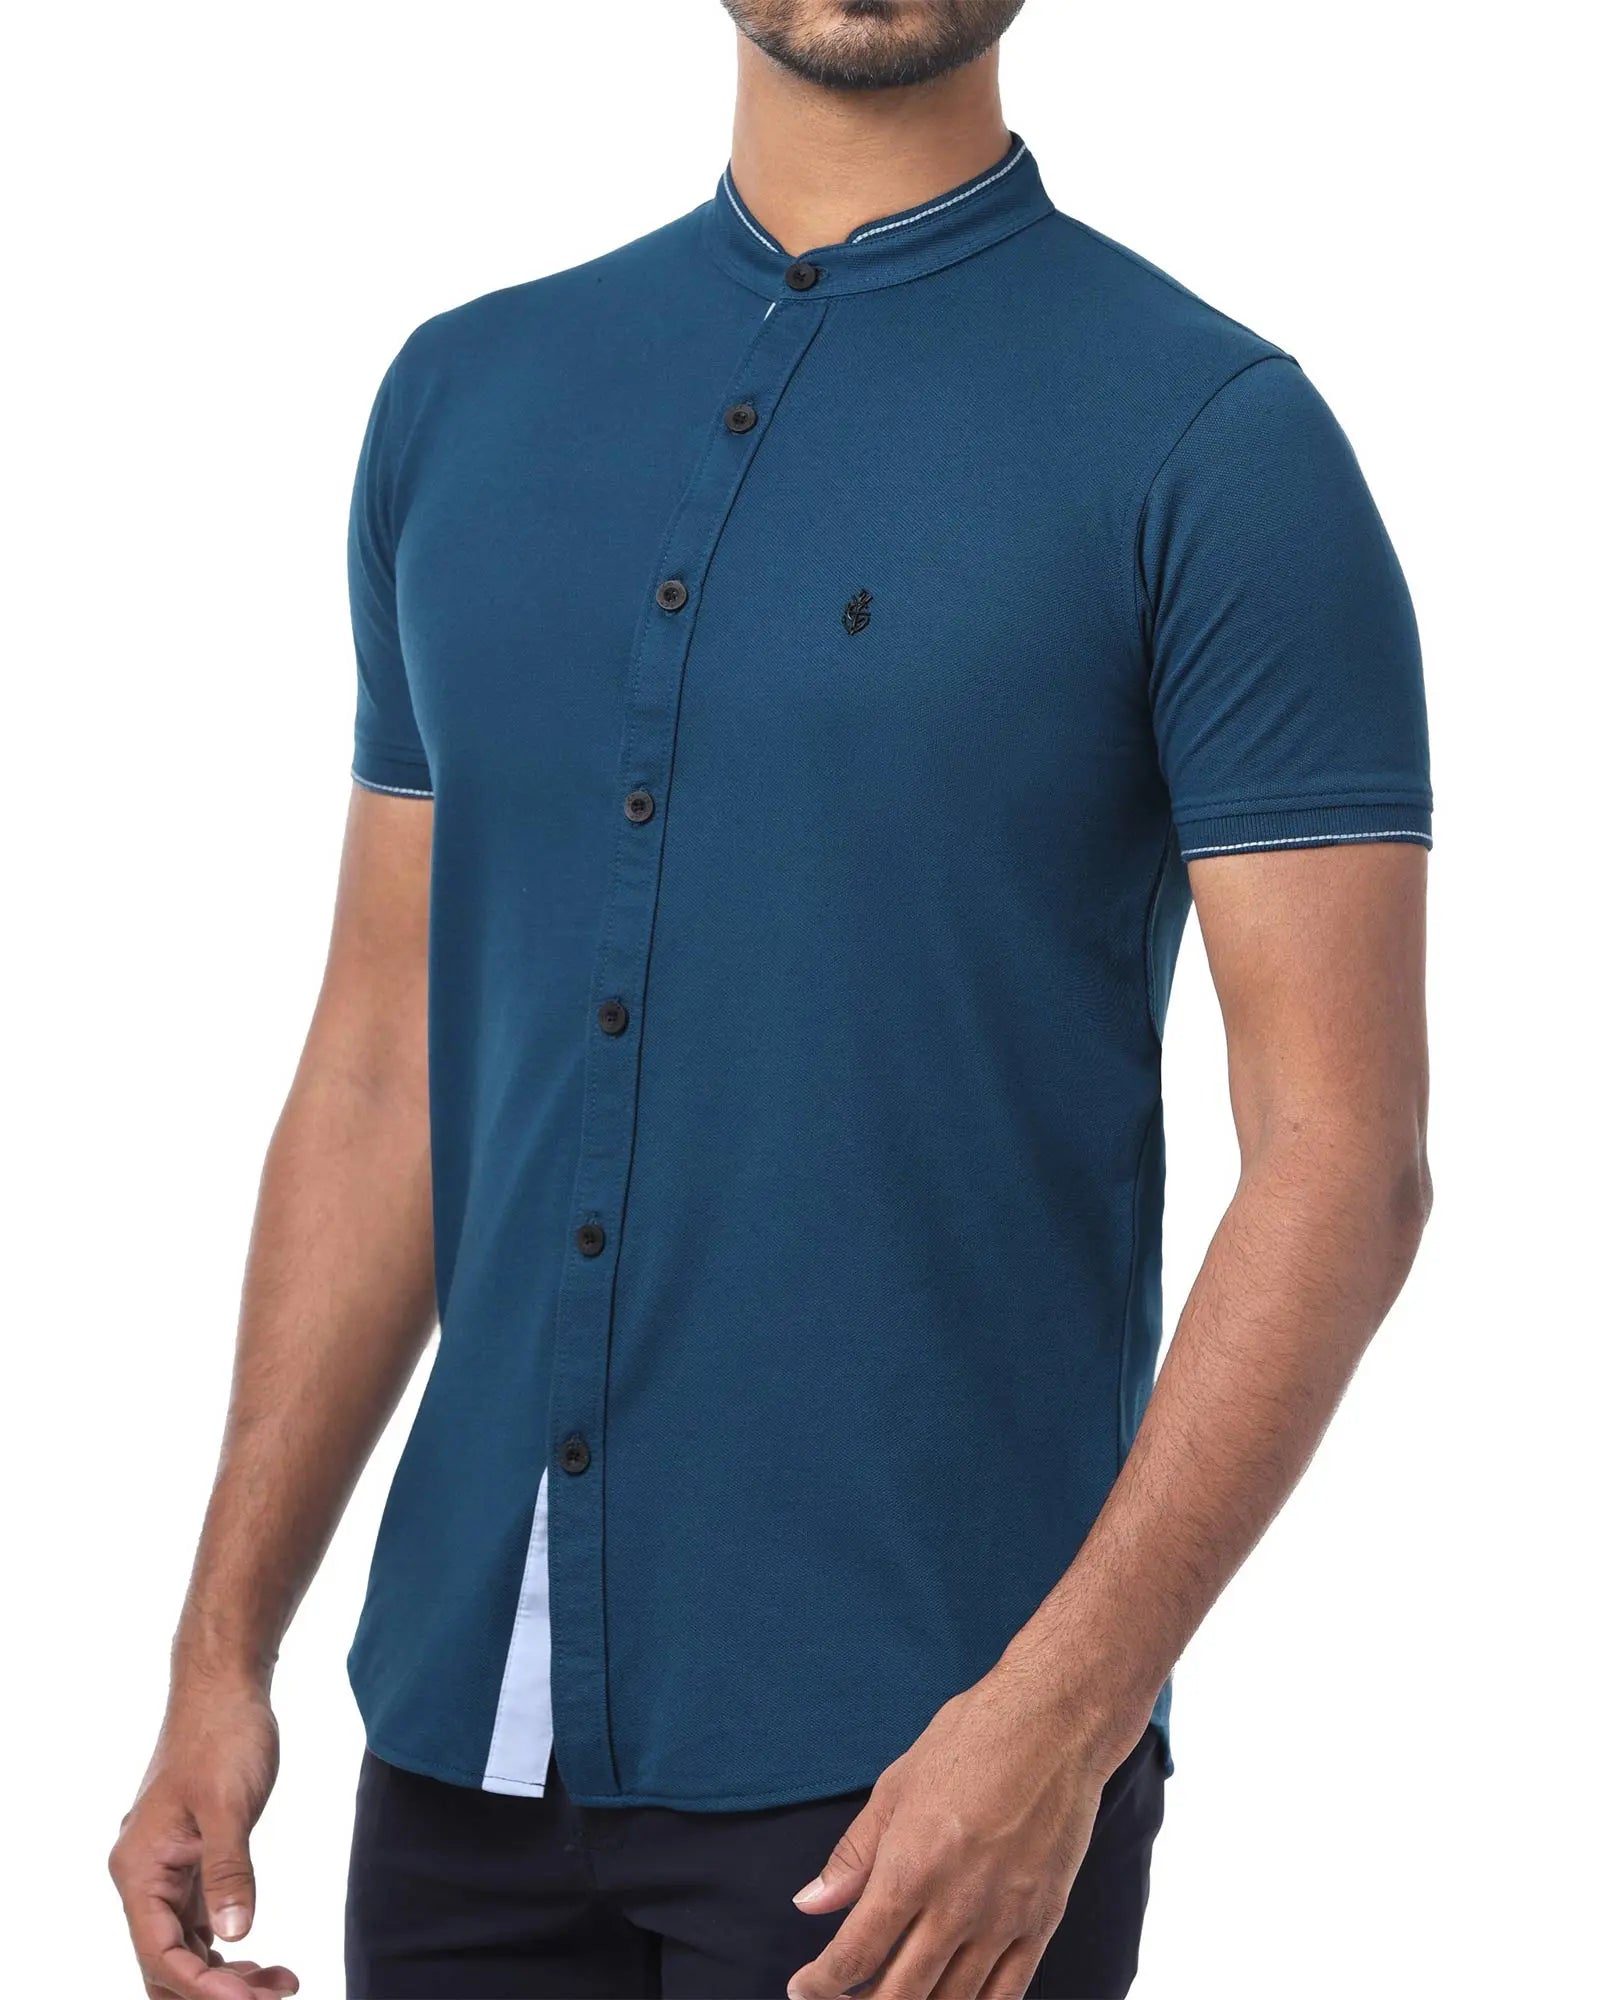 LCY London | Capsule Collection - Men&#39;s Hybrid Short Sleeved Shirt | Full Buttoned LCY London